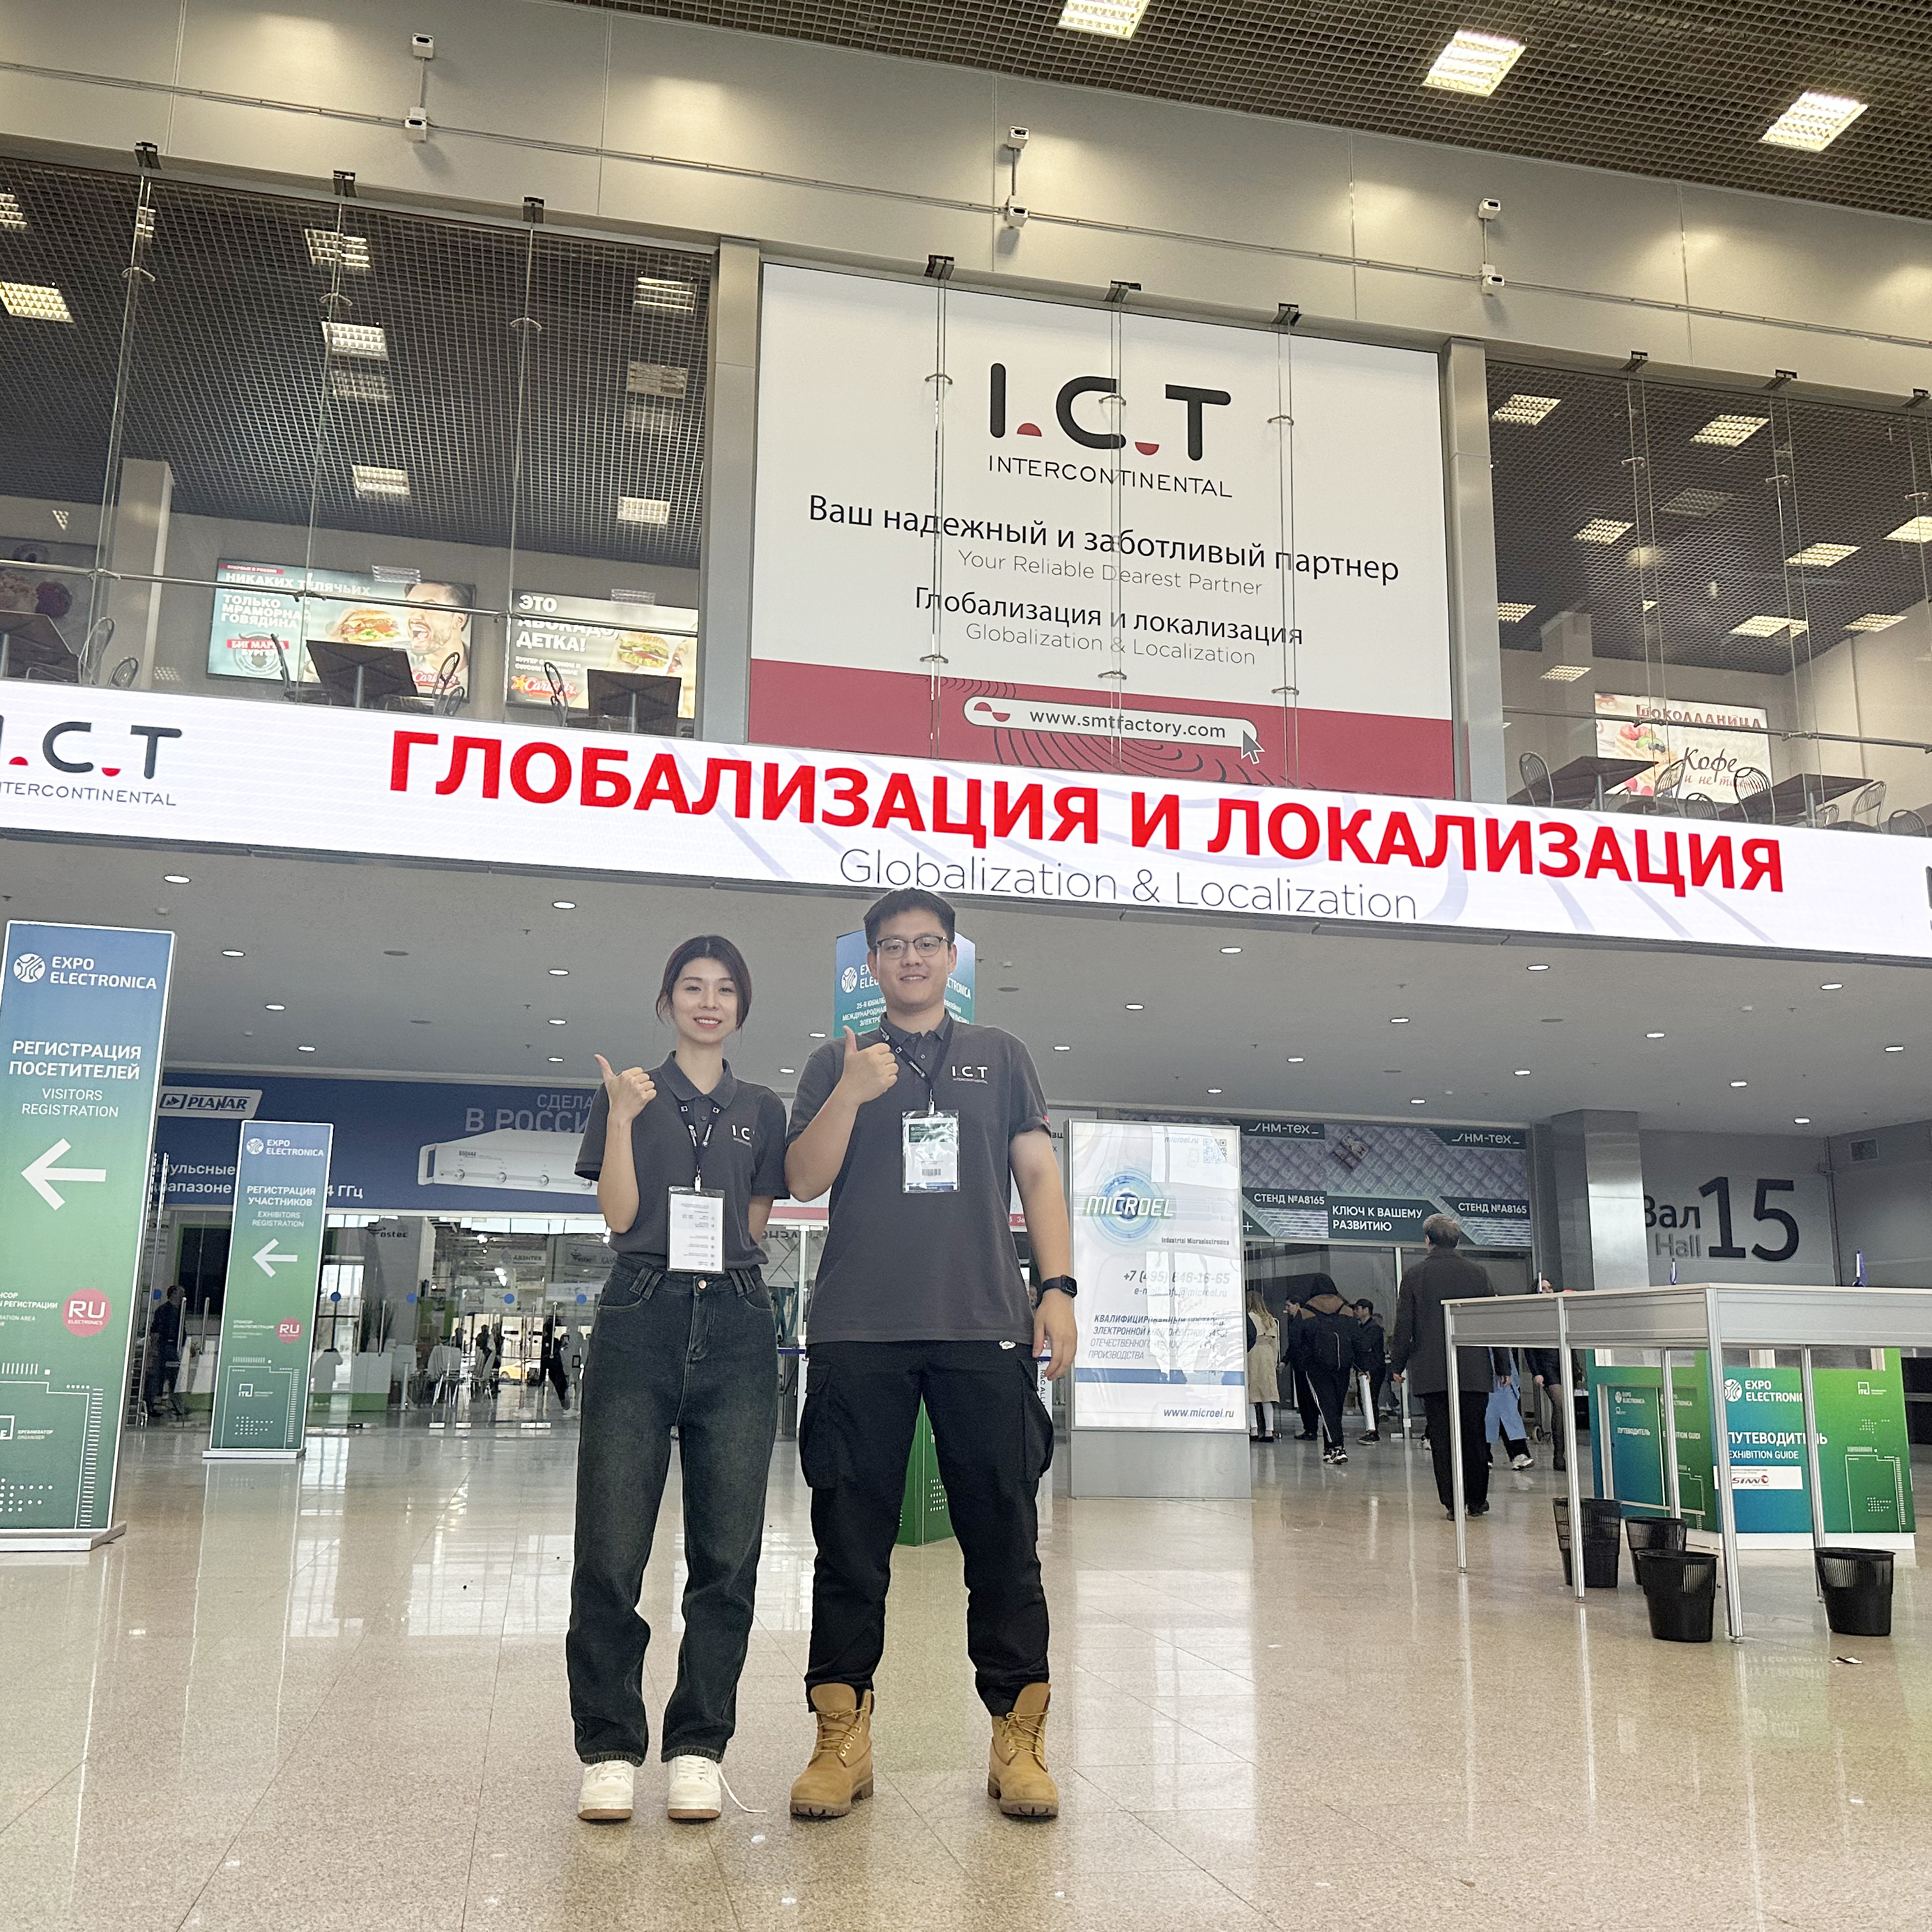 I.C.T at The ExpoElectronica Exhibition in Moscow